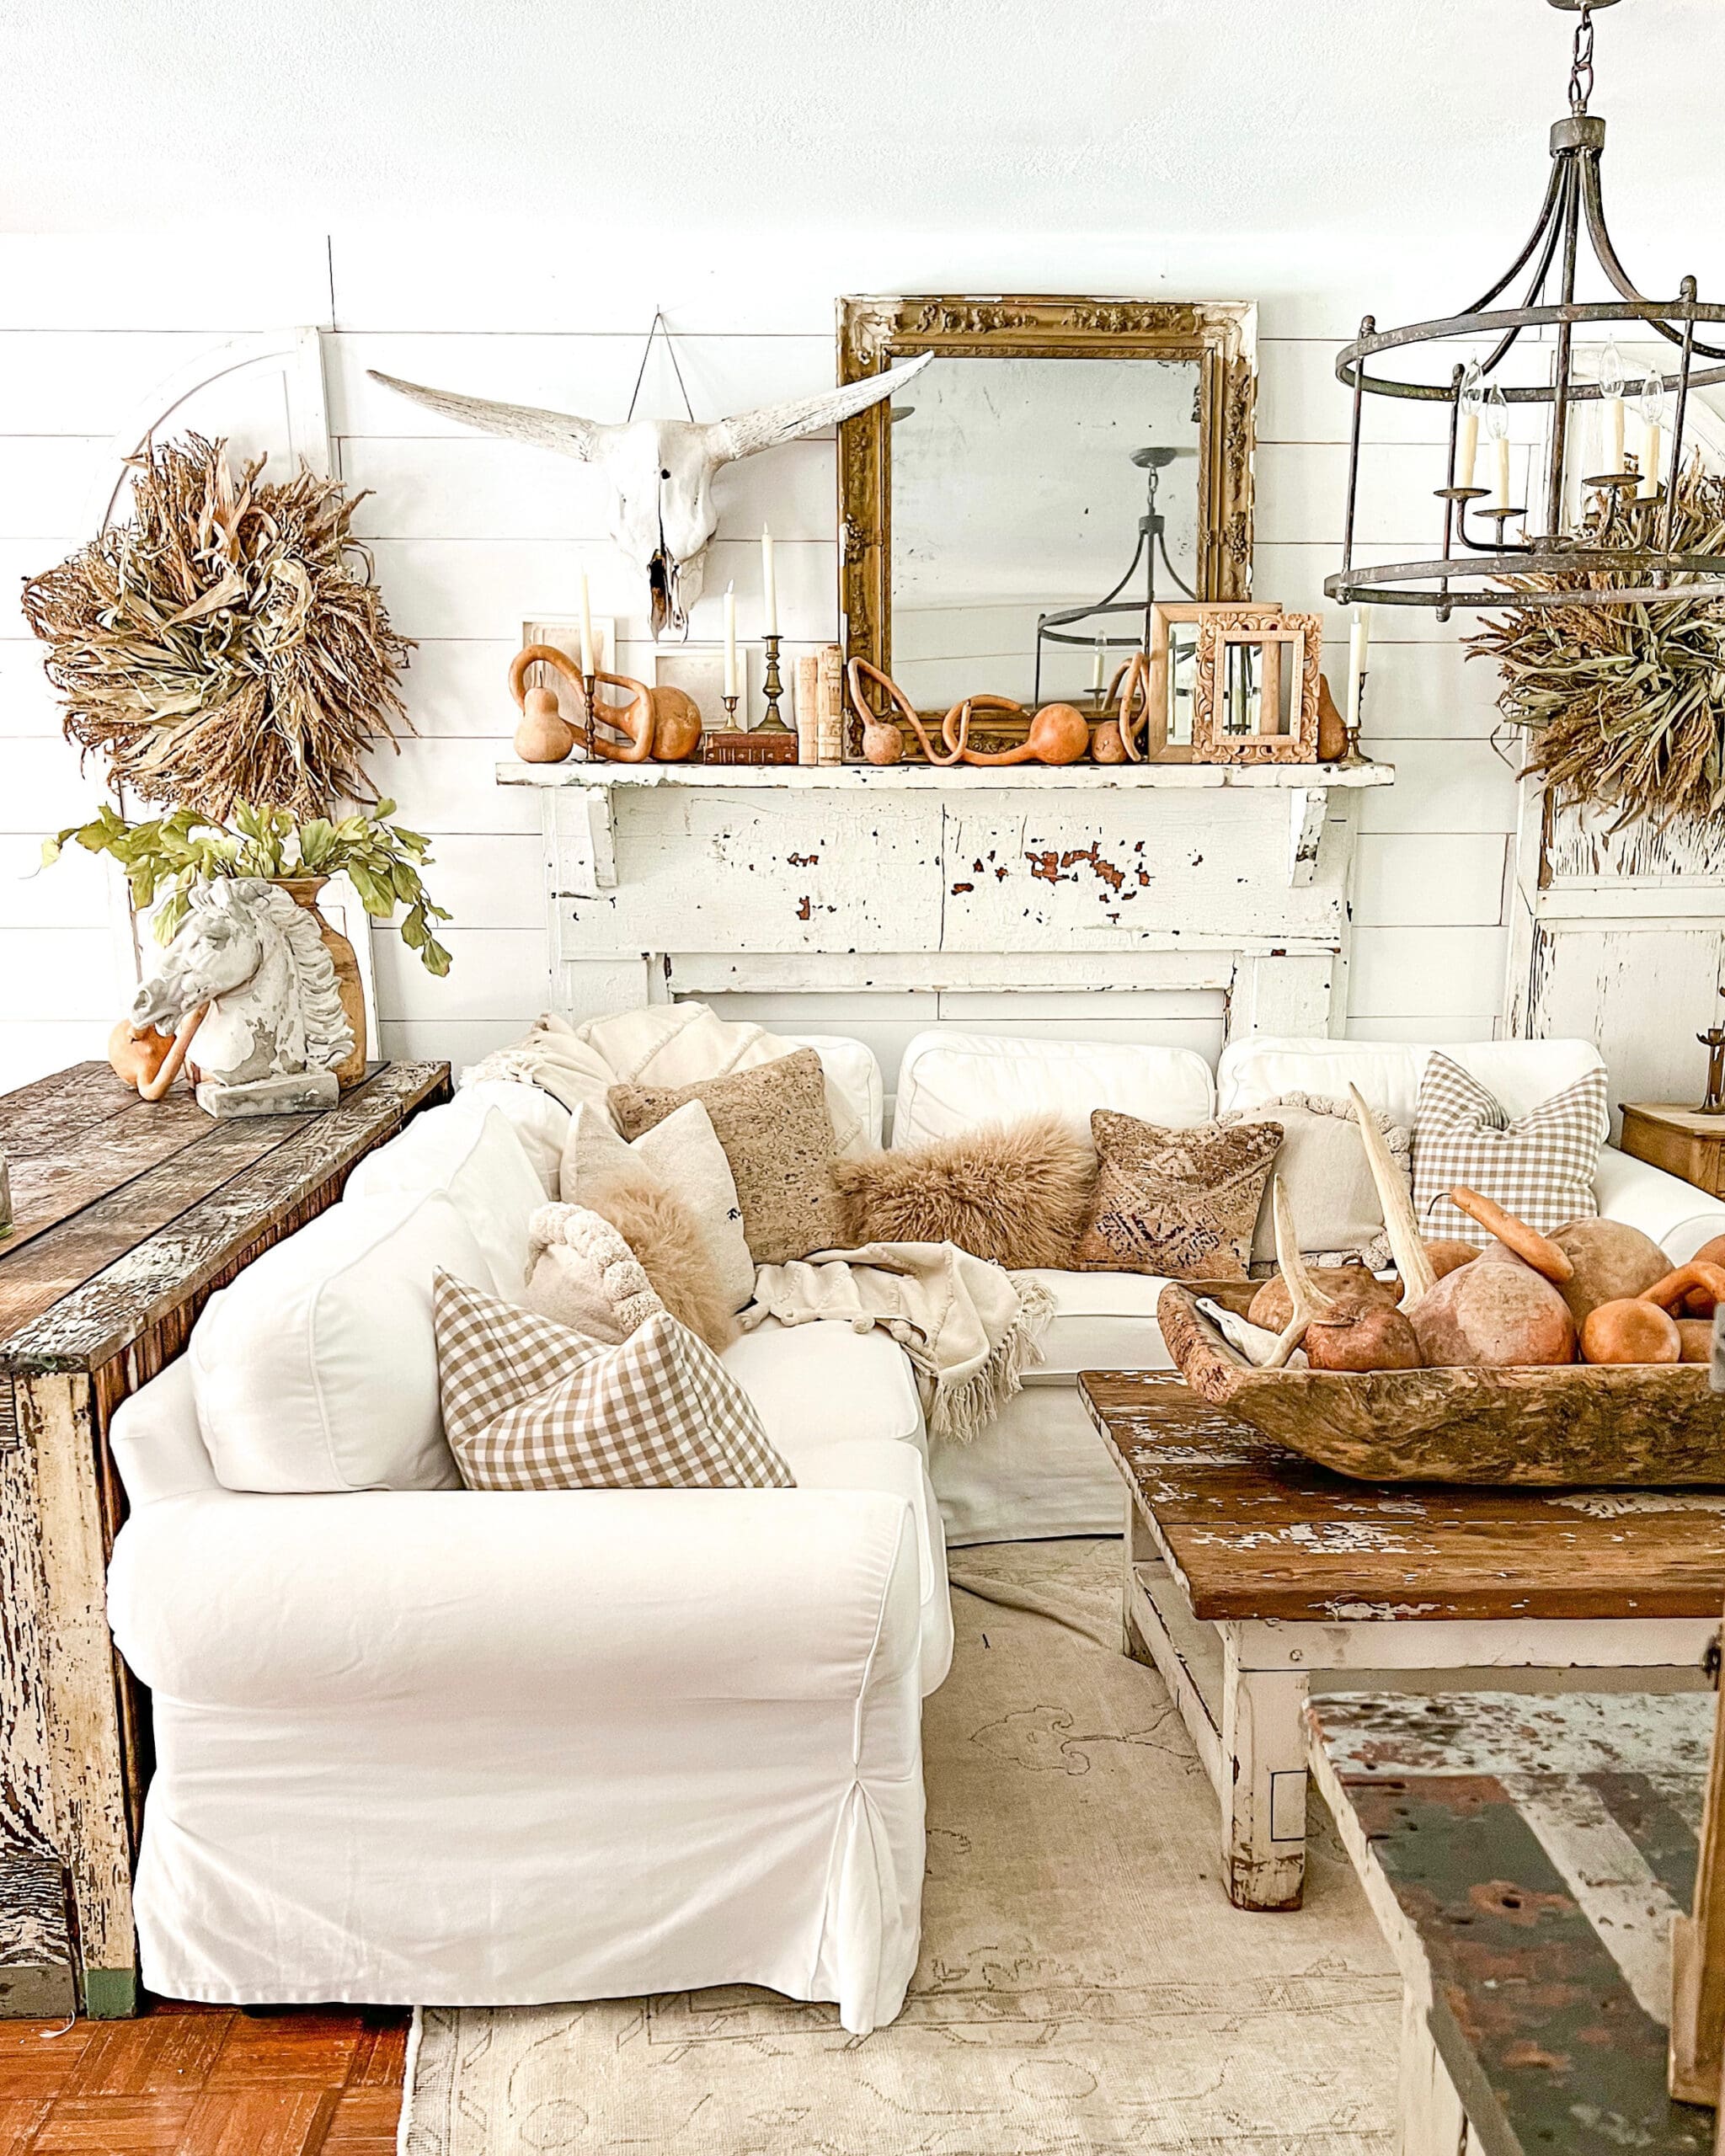 family room styled for fall with gourds, an antique gold mirror, and cozy fall colored pillows